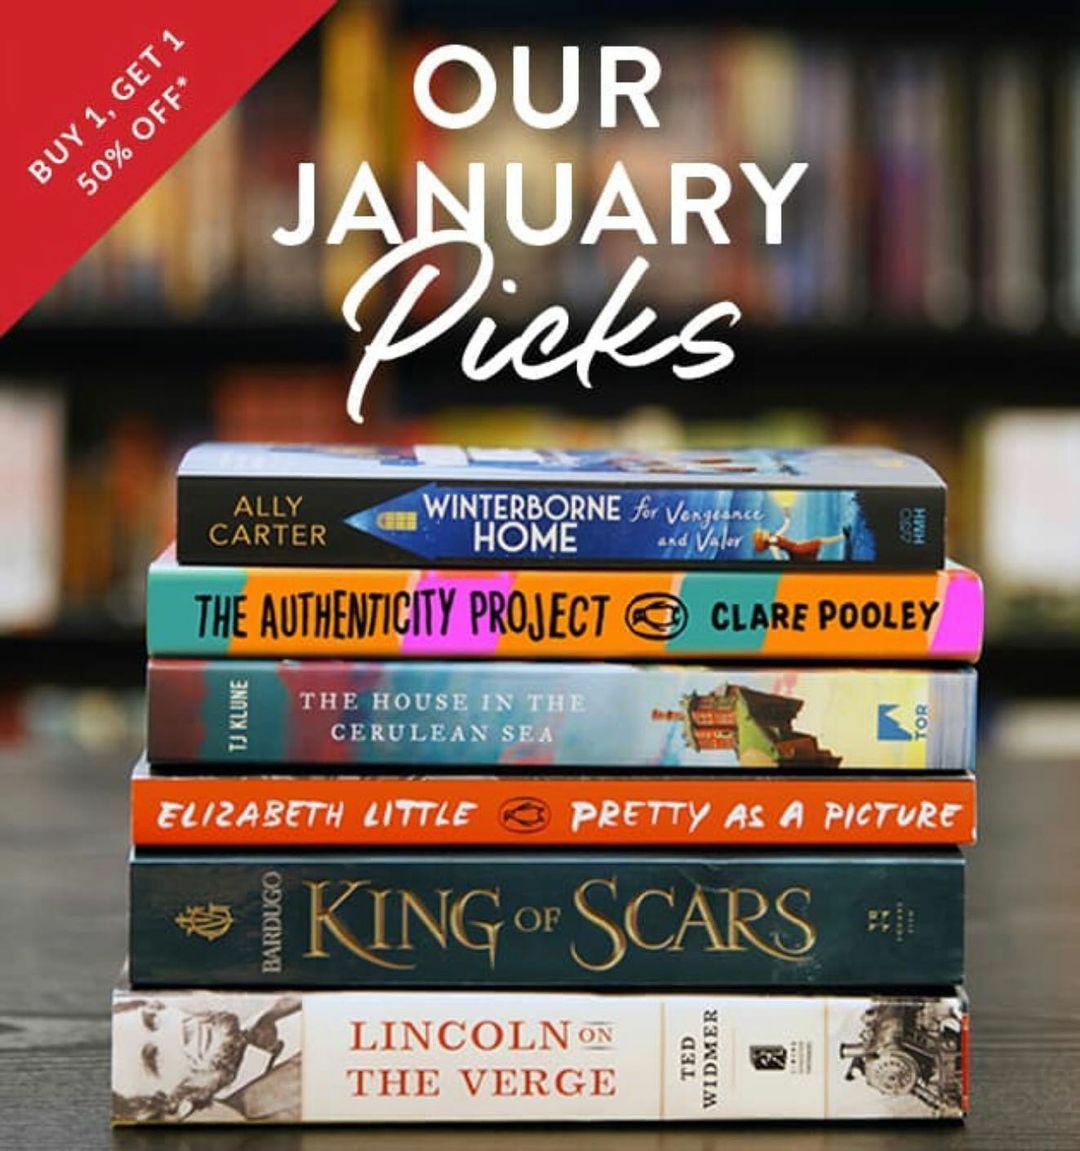 Have you checked out our #bnbooksofthemonth for January??  Definitely look into our recs for-
#Fiction: Clare Pooley &
#SpeculativeFiction: TJ Klune
⬆️ #StaffFavorite!! 

#bookstoread #bookstoresofinstagram #januaryreads #socal #losangeles #marinadelrey #bn232